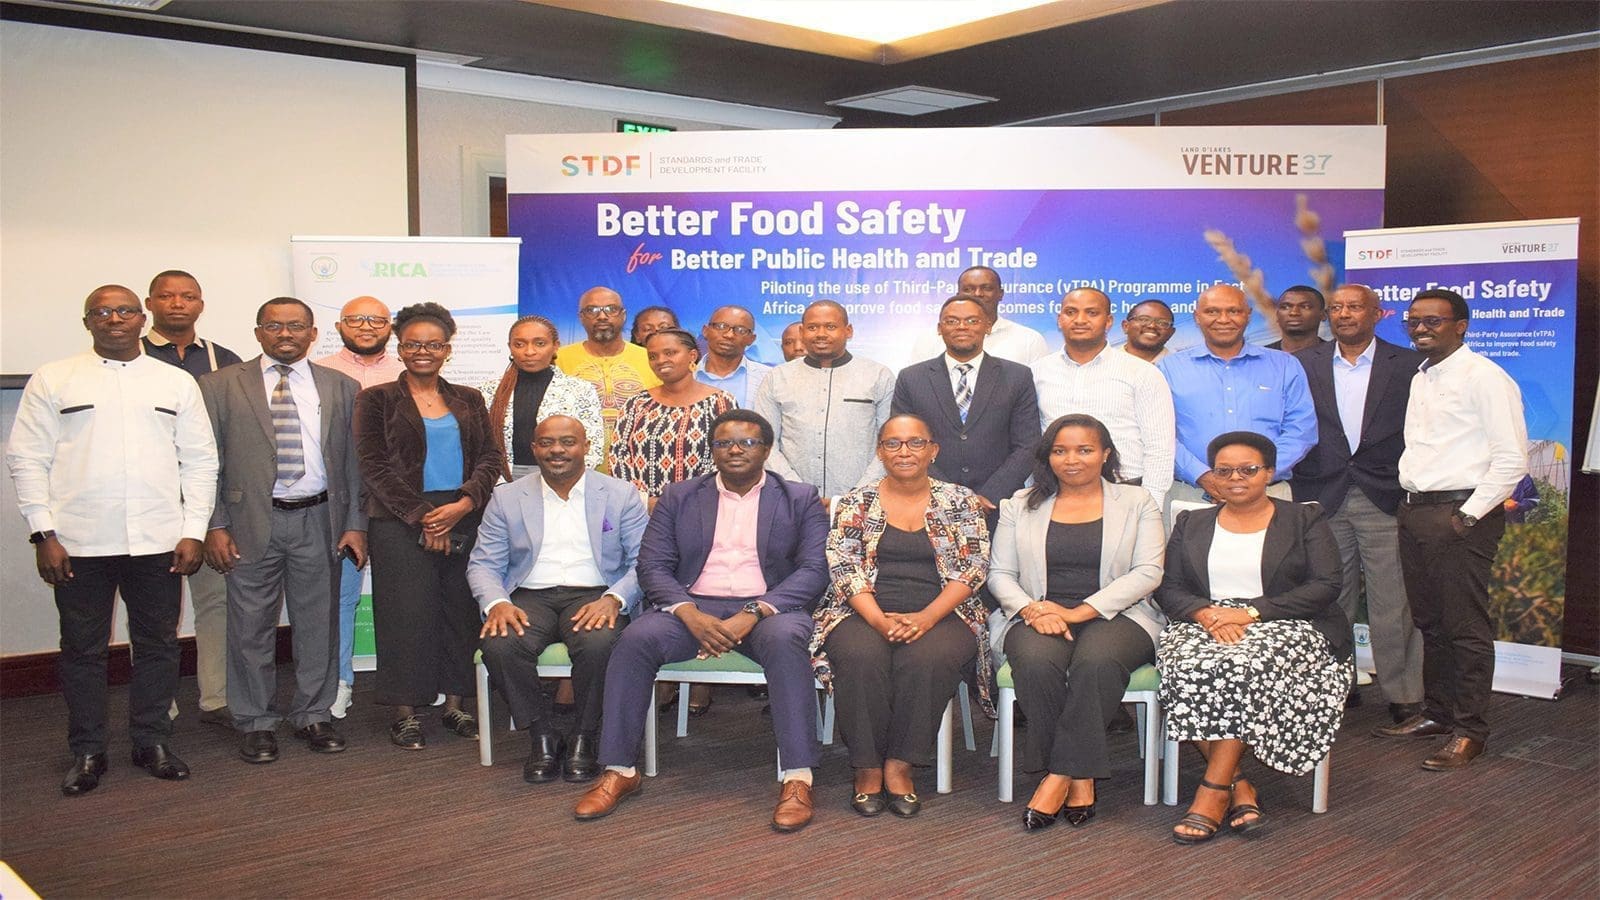 Major project commences in Rwanda and Uganda with US$800,000 investment to enhance food safety